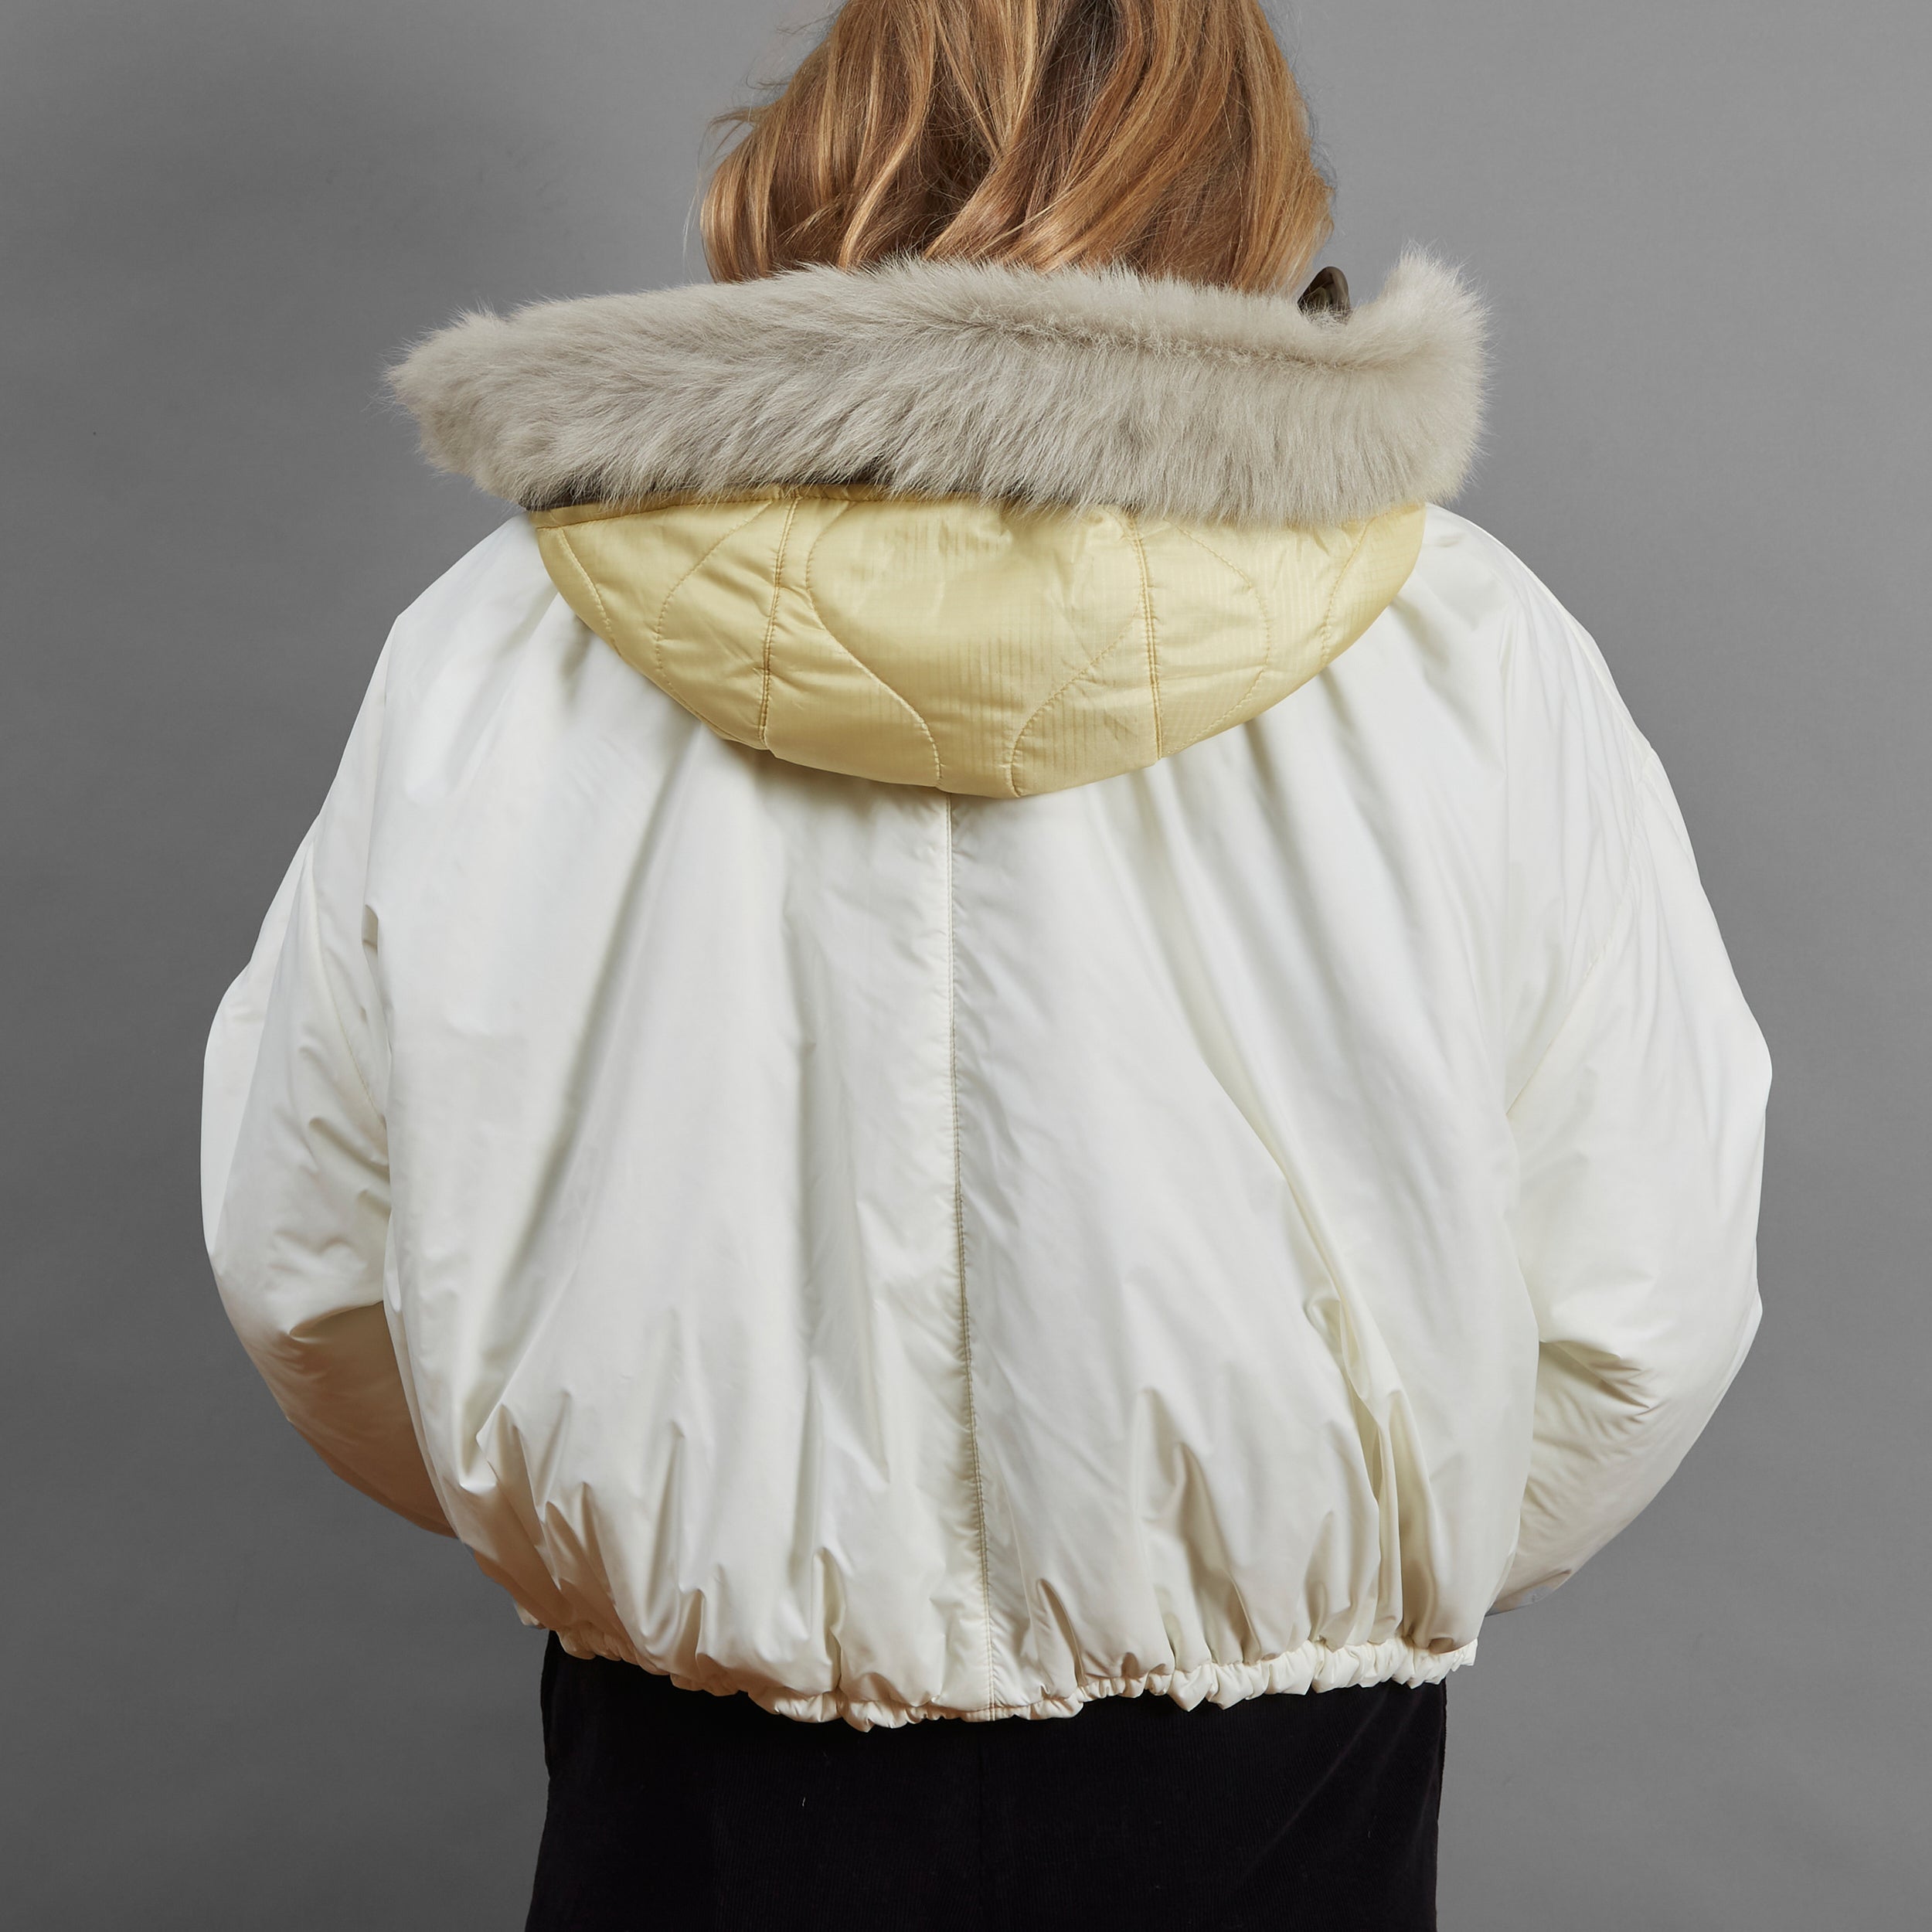 Hetre Alresford Hampshire Boutique Clothes Shop Marfa Stance Pale Sage White Reversible Parachute Bomber With Reversible Hood 